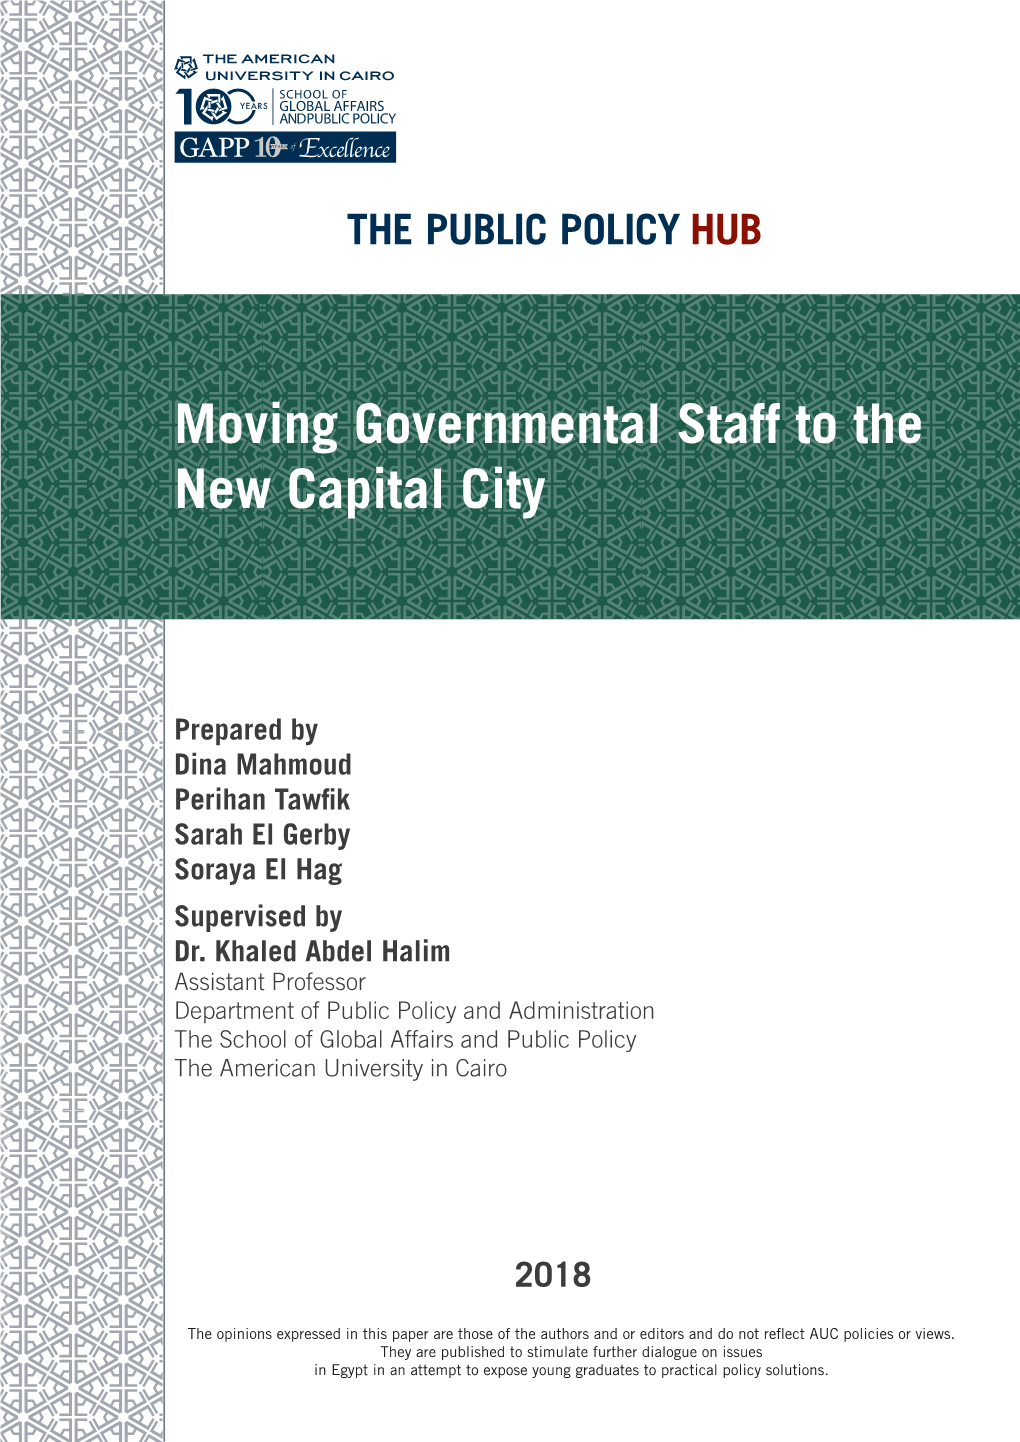 Moving Governmental Staff to the New Capital City